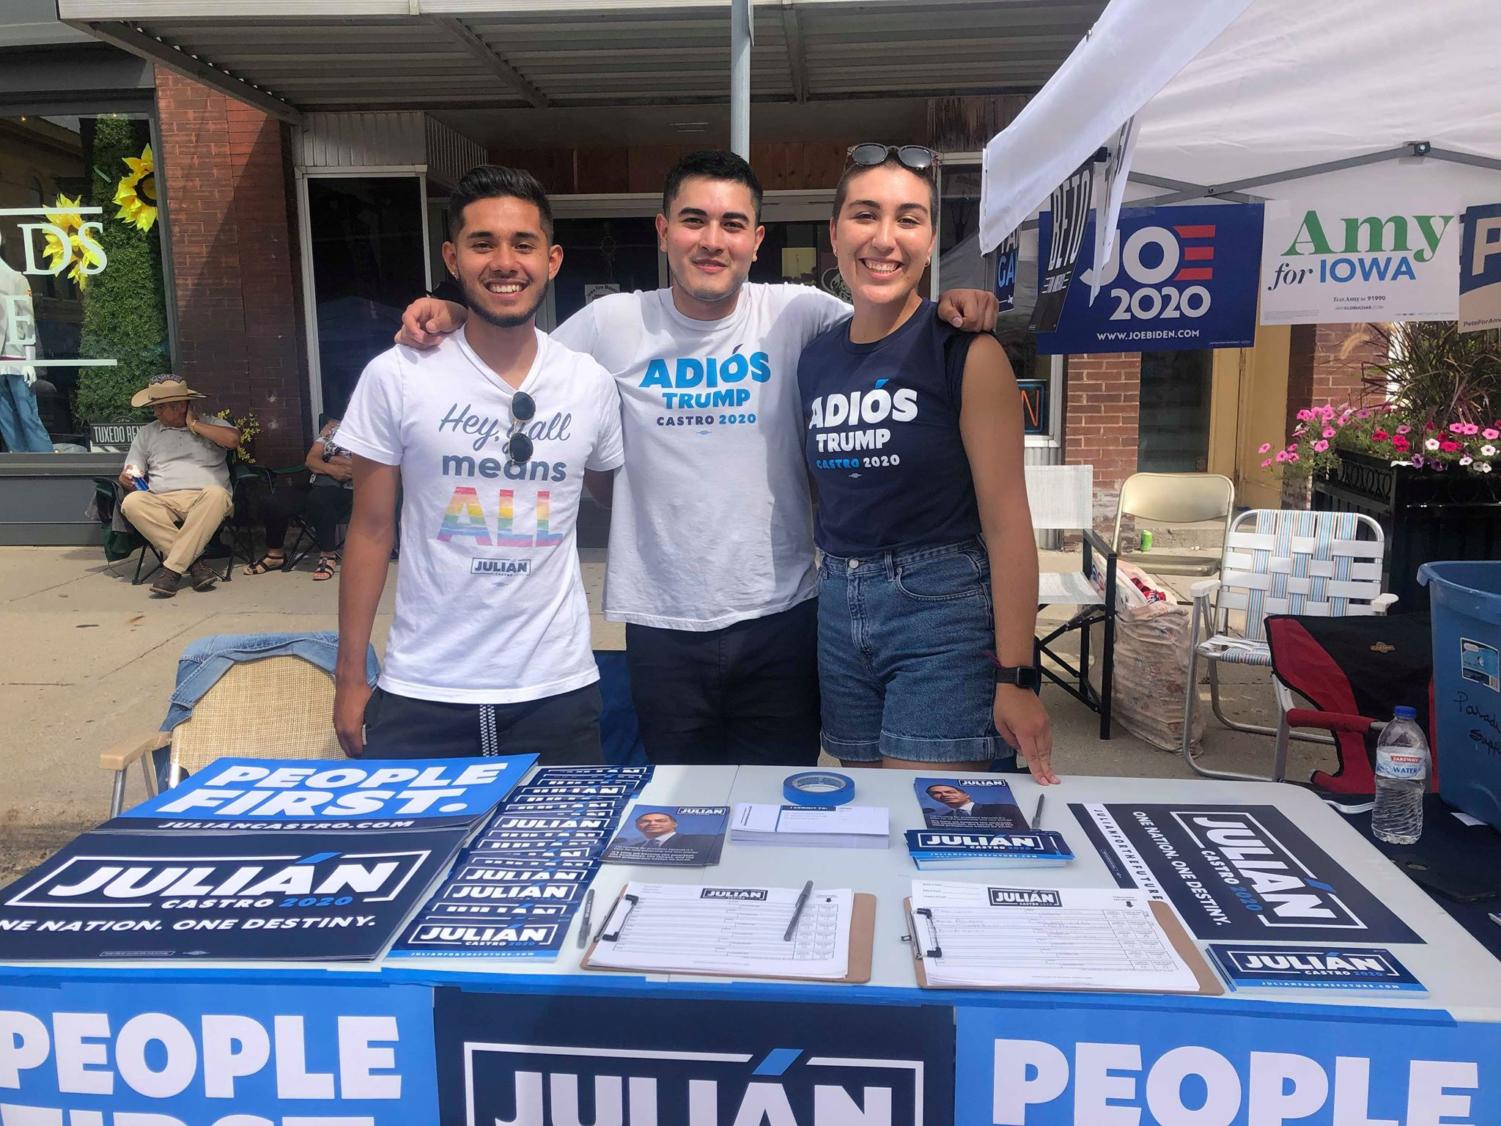 UChicago students Jesse Martinez and Alicia Hurtado pose with another intern, Eliseo Flores, at a Latino festival in Iowa.